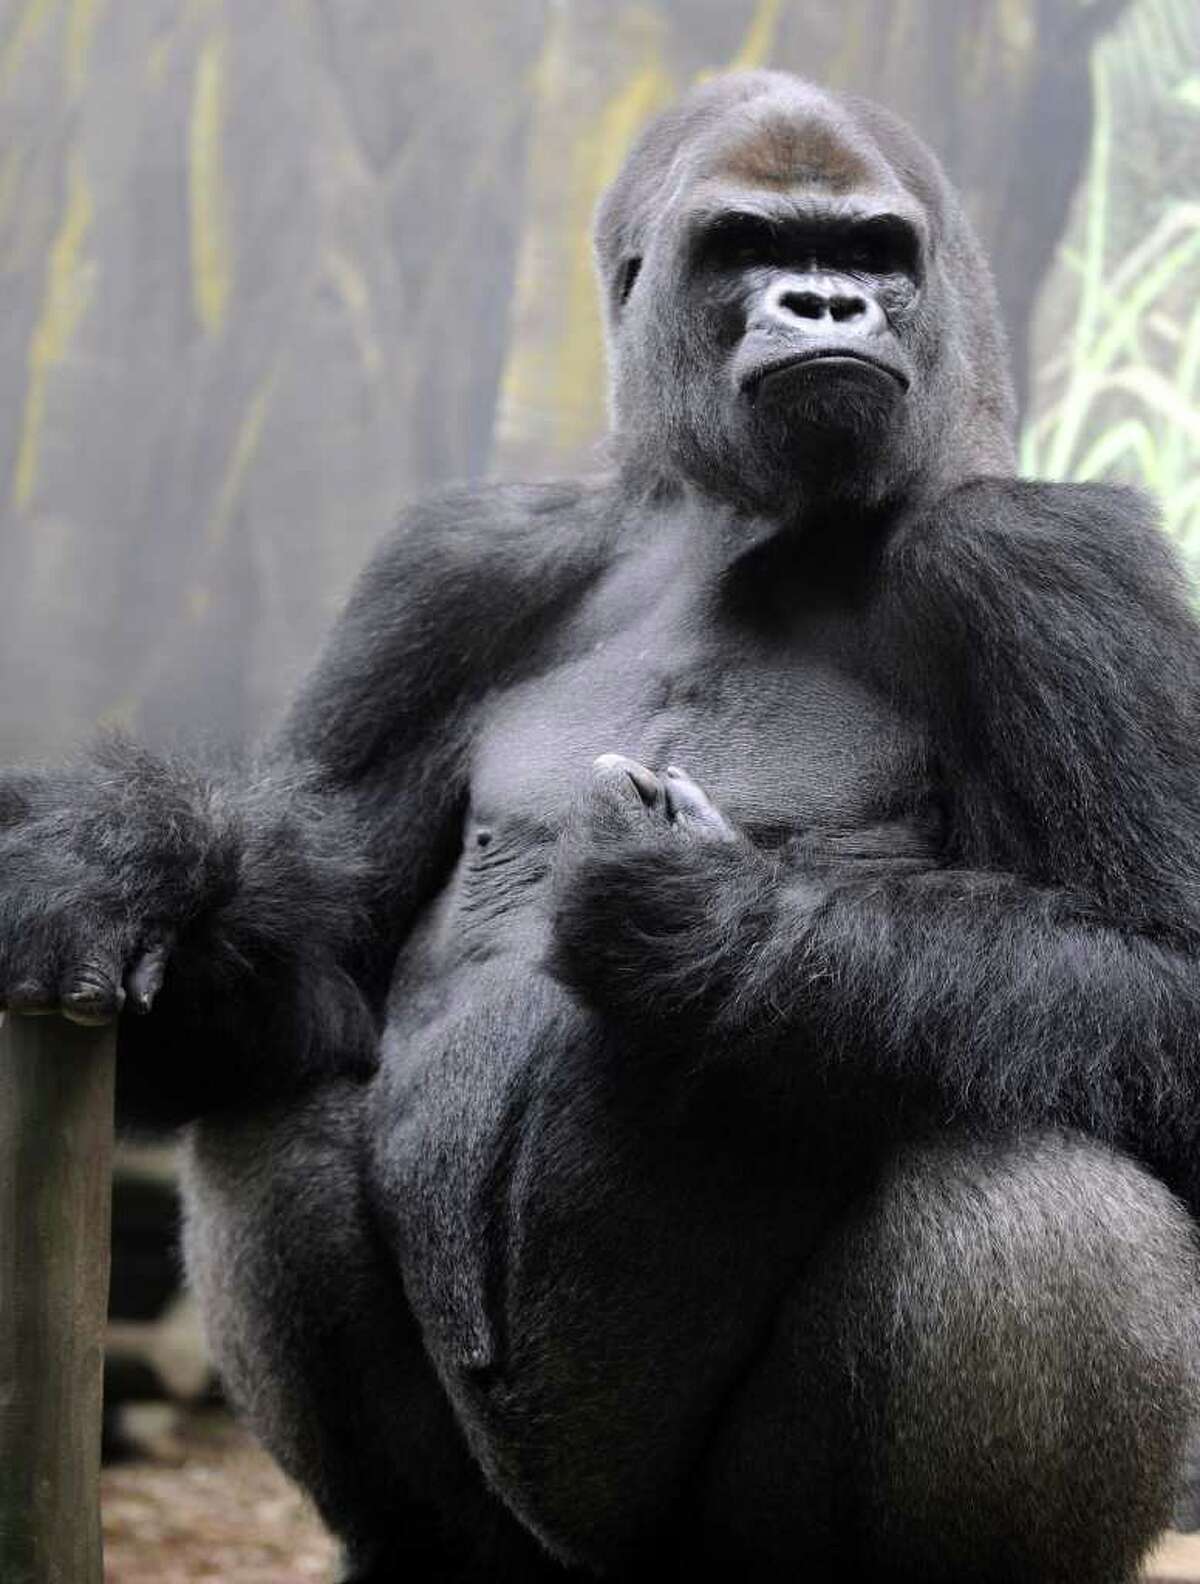 Ya Kwanza, a silverback gorilla male, sits in its enclosure "Gorilla's Camp" at the Amneville zoo, eastern France, on April 04, 2012. Ya Kwanza arrived with seven other gorillas from other western zoos, as part of the European Endangered species Programme (EEP) to promote their breeding.